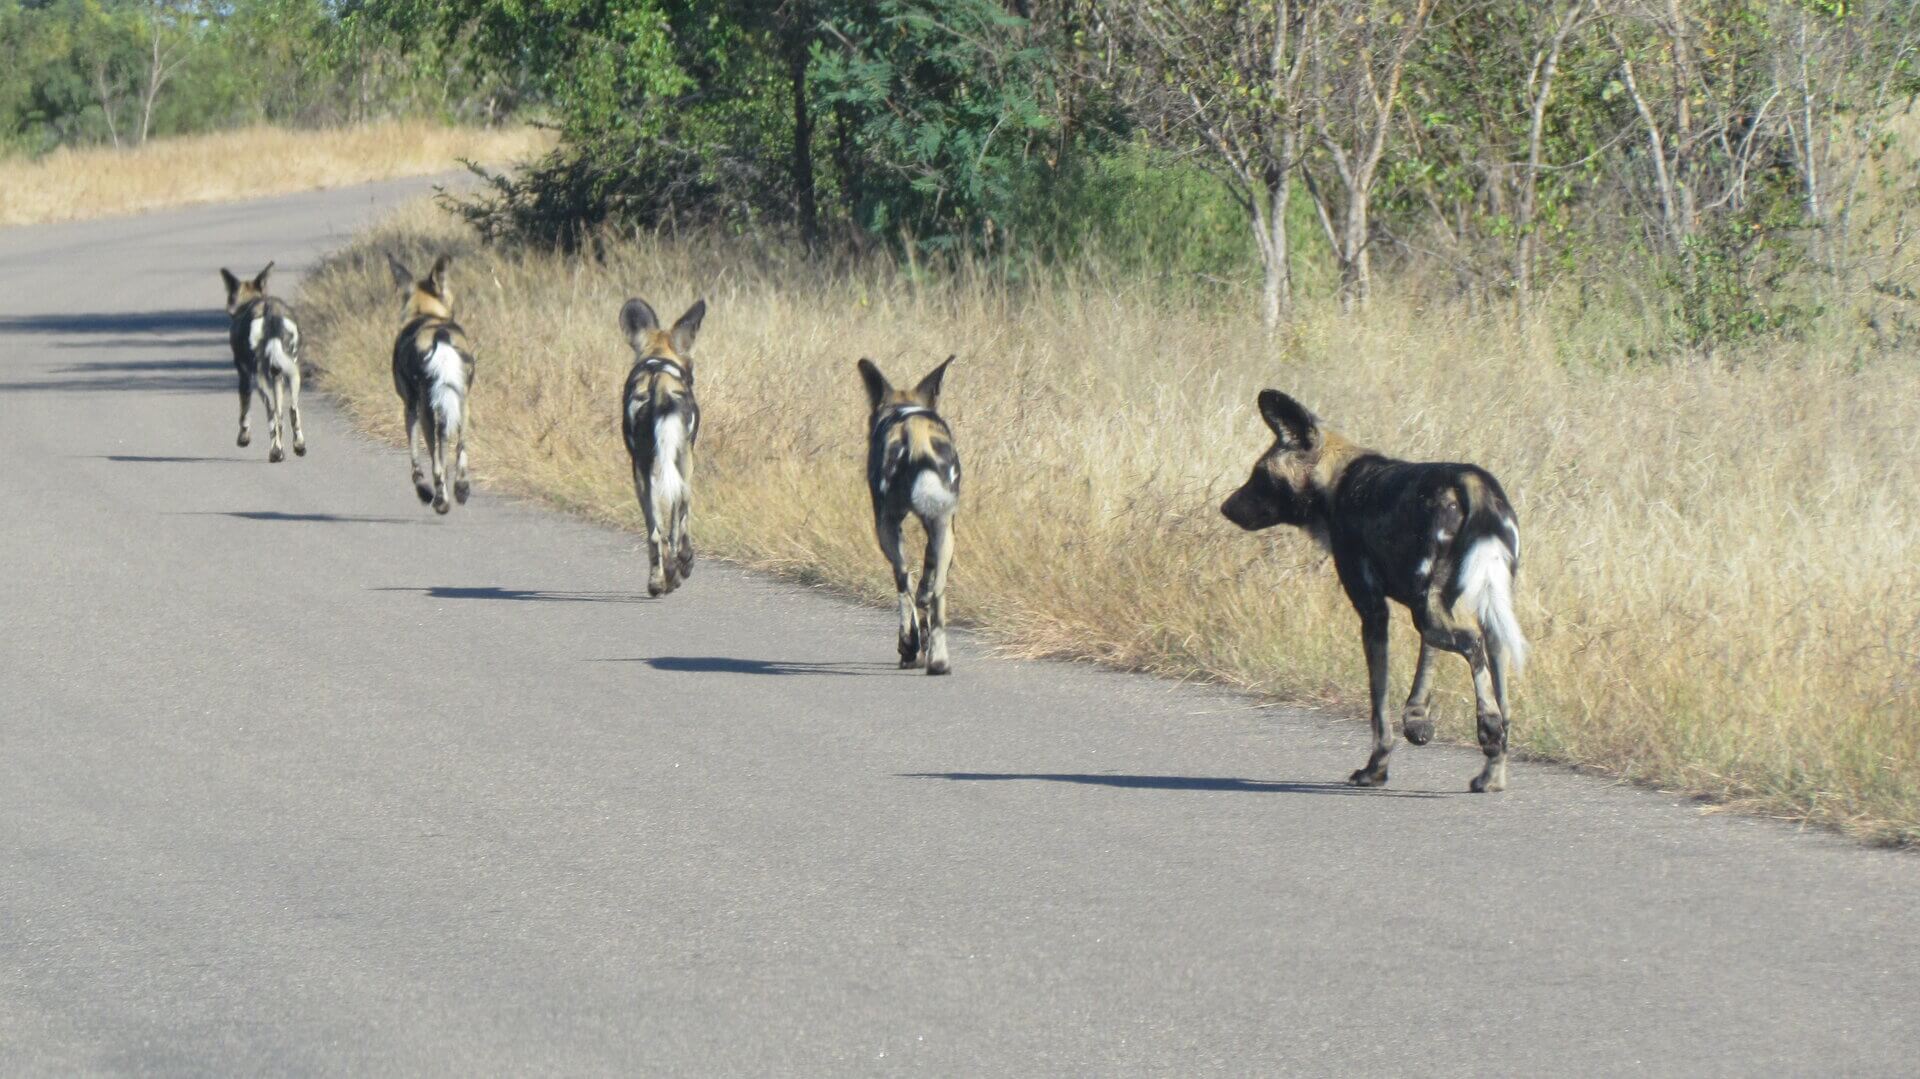 Wild Dogs seen on Kruger Park Safari Drive